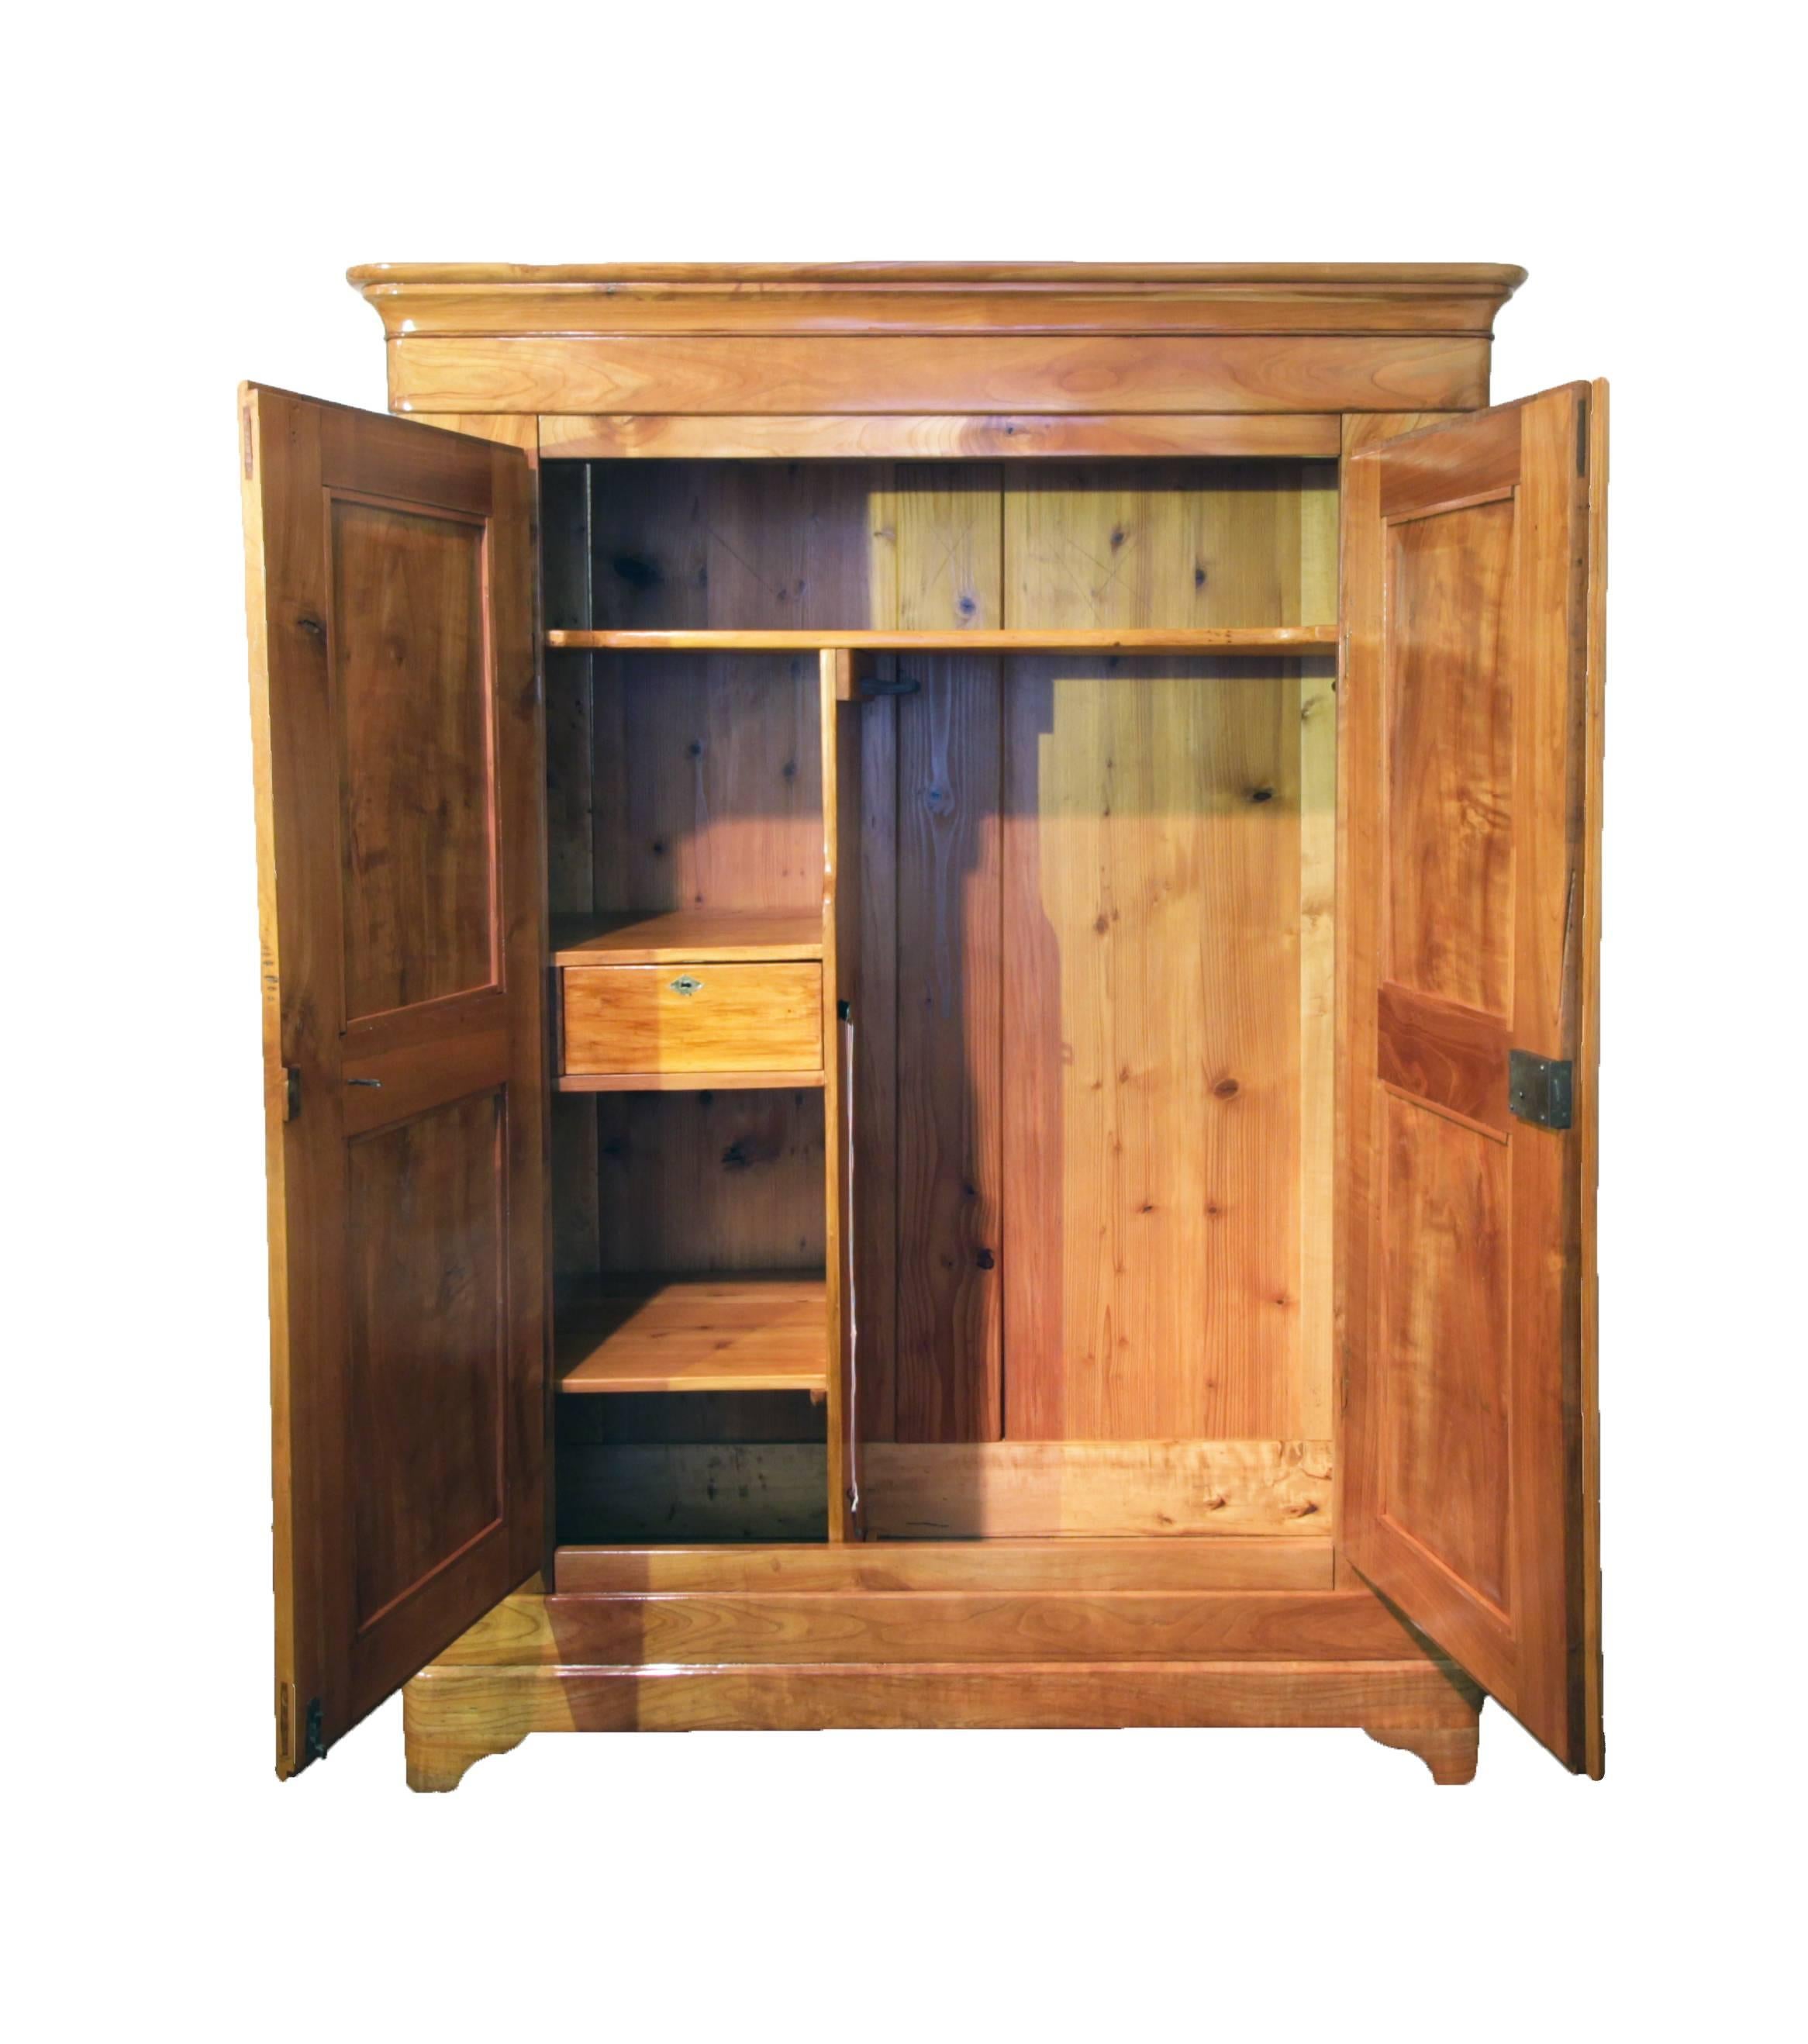 Very nice simple wardrobe from the time of the Biedermeier. Made of solid cheerywood. The wardrobe was lovingly restored by us.
The wardrobe can be dismantled and shipped dismantled. An illustrated guide for the construction is enclosed. The